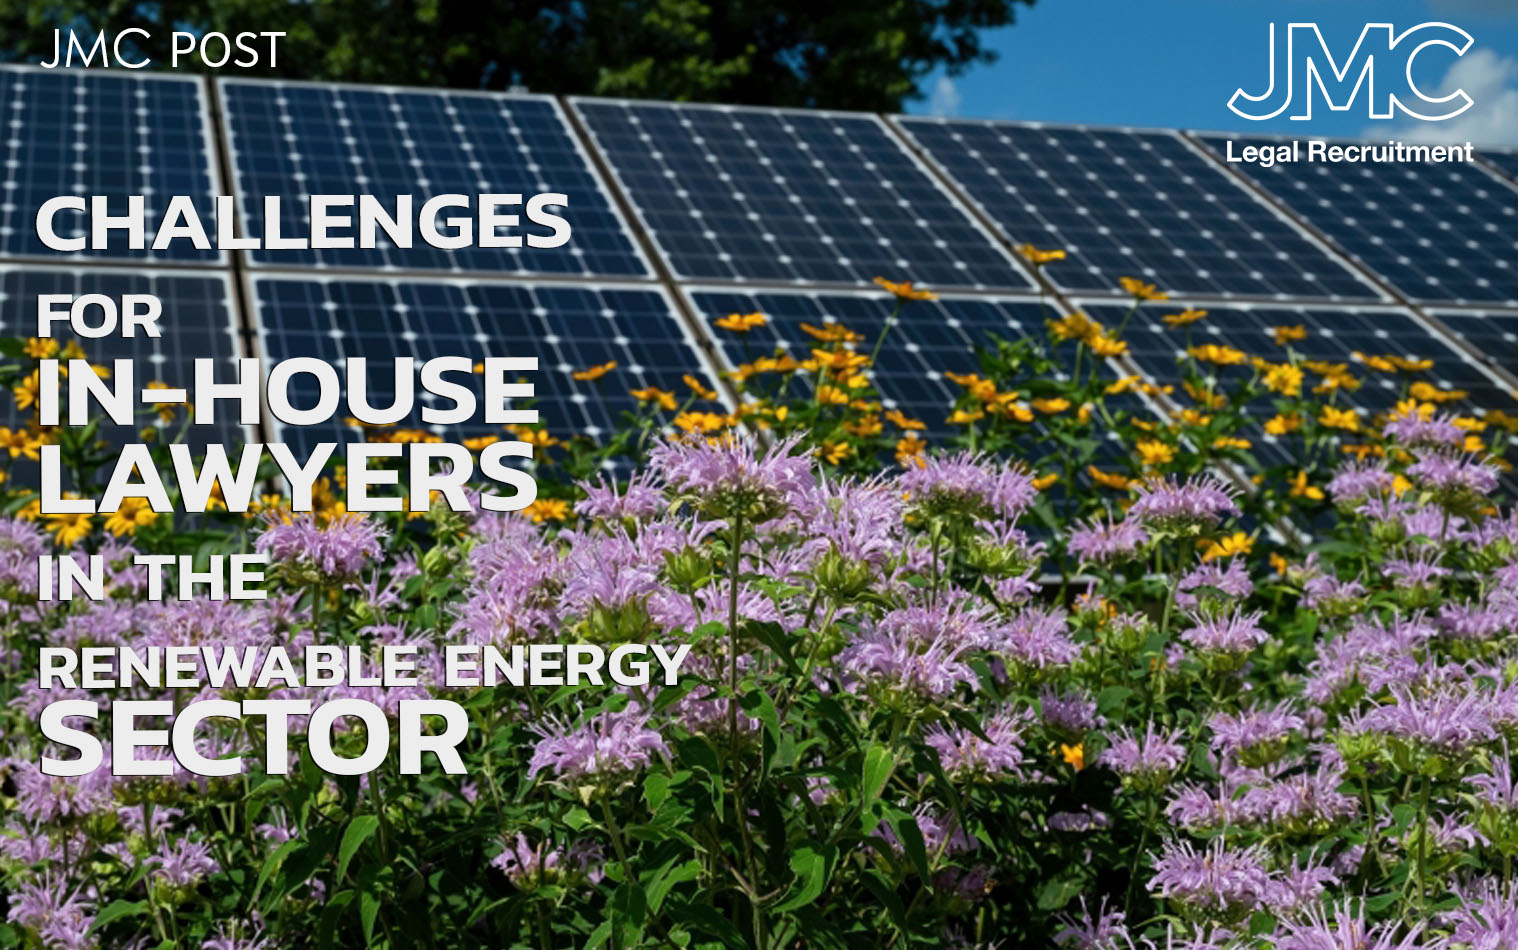 Challenges for In-House Lawyers in the Renewable Energy Sector